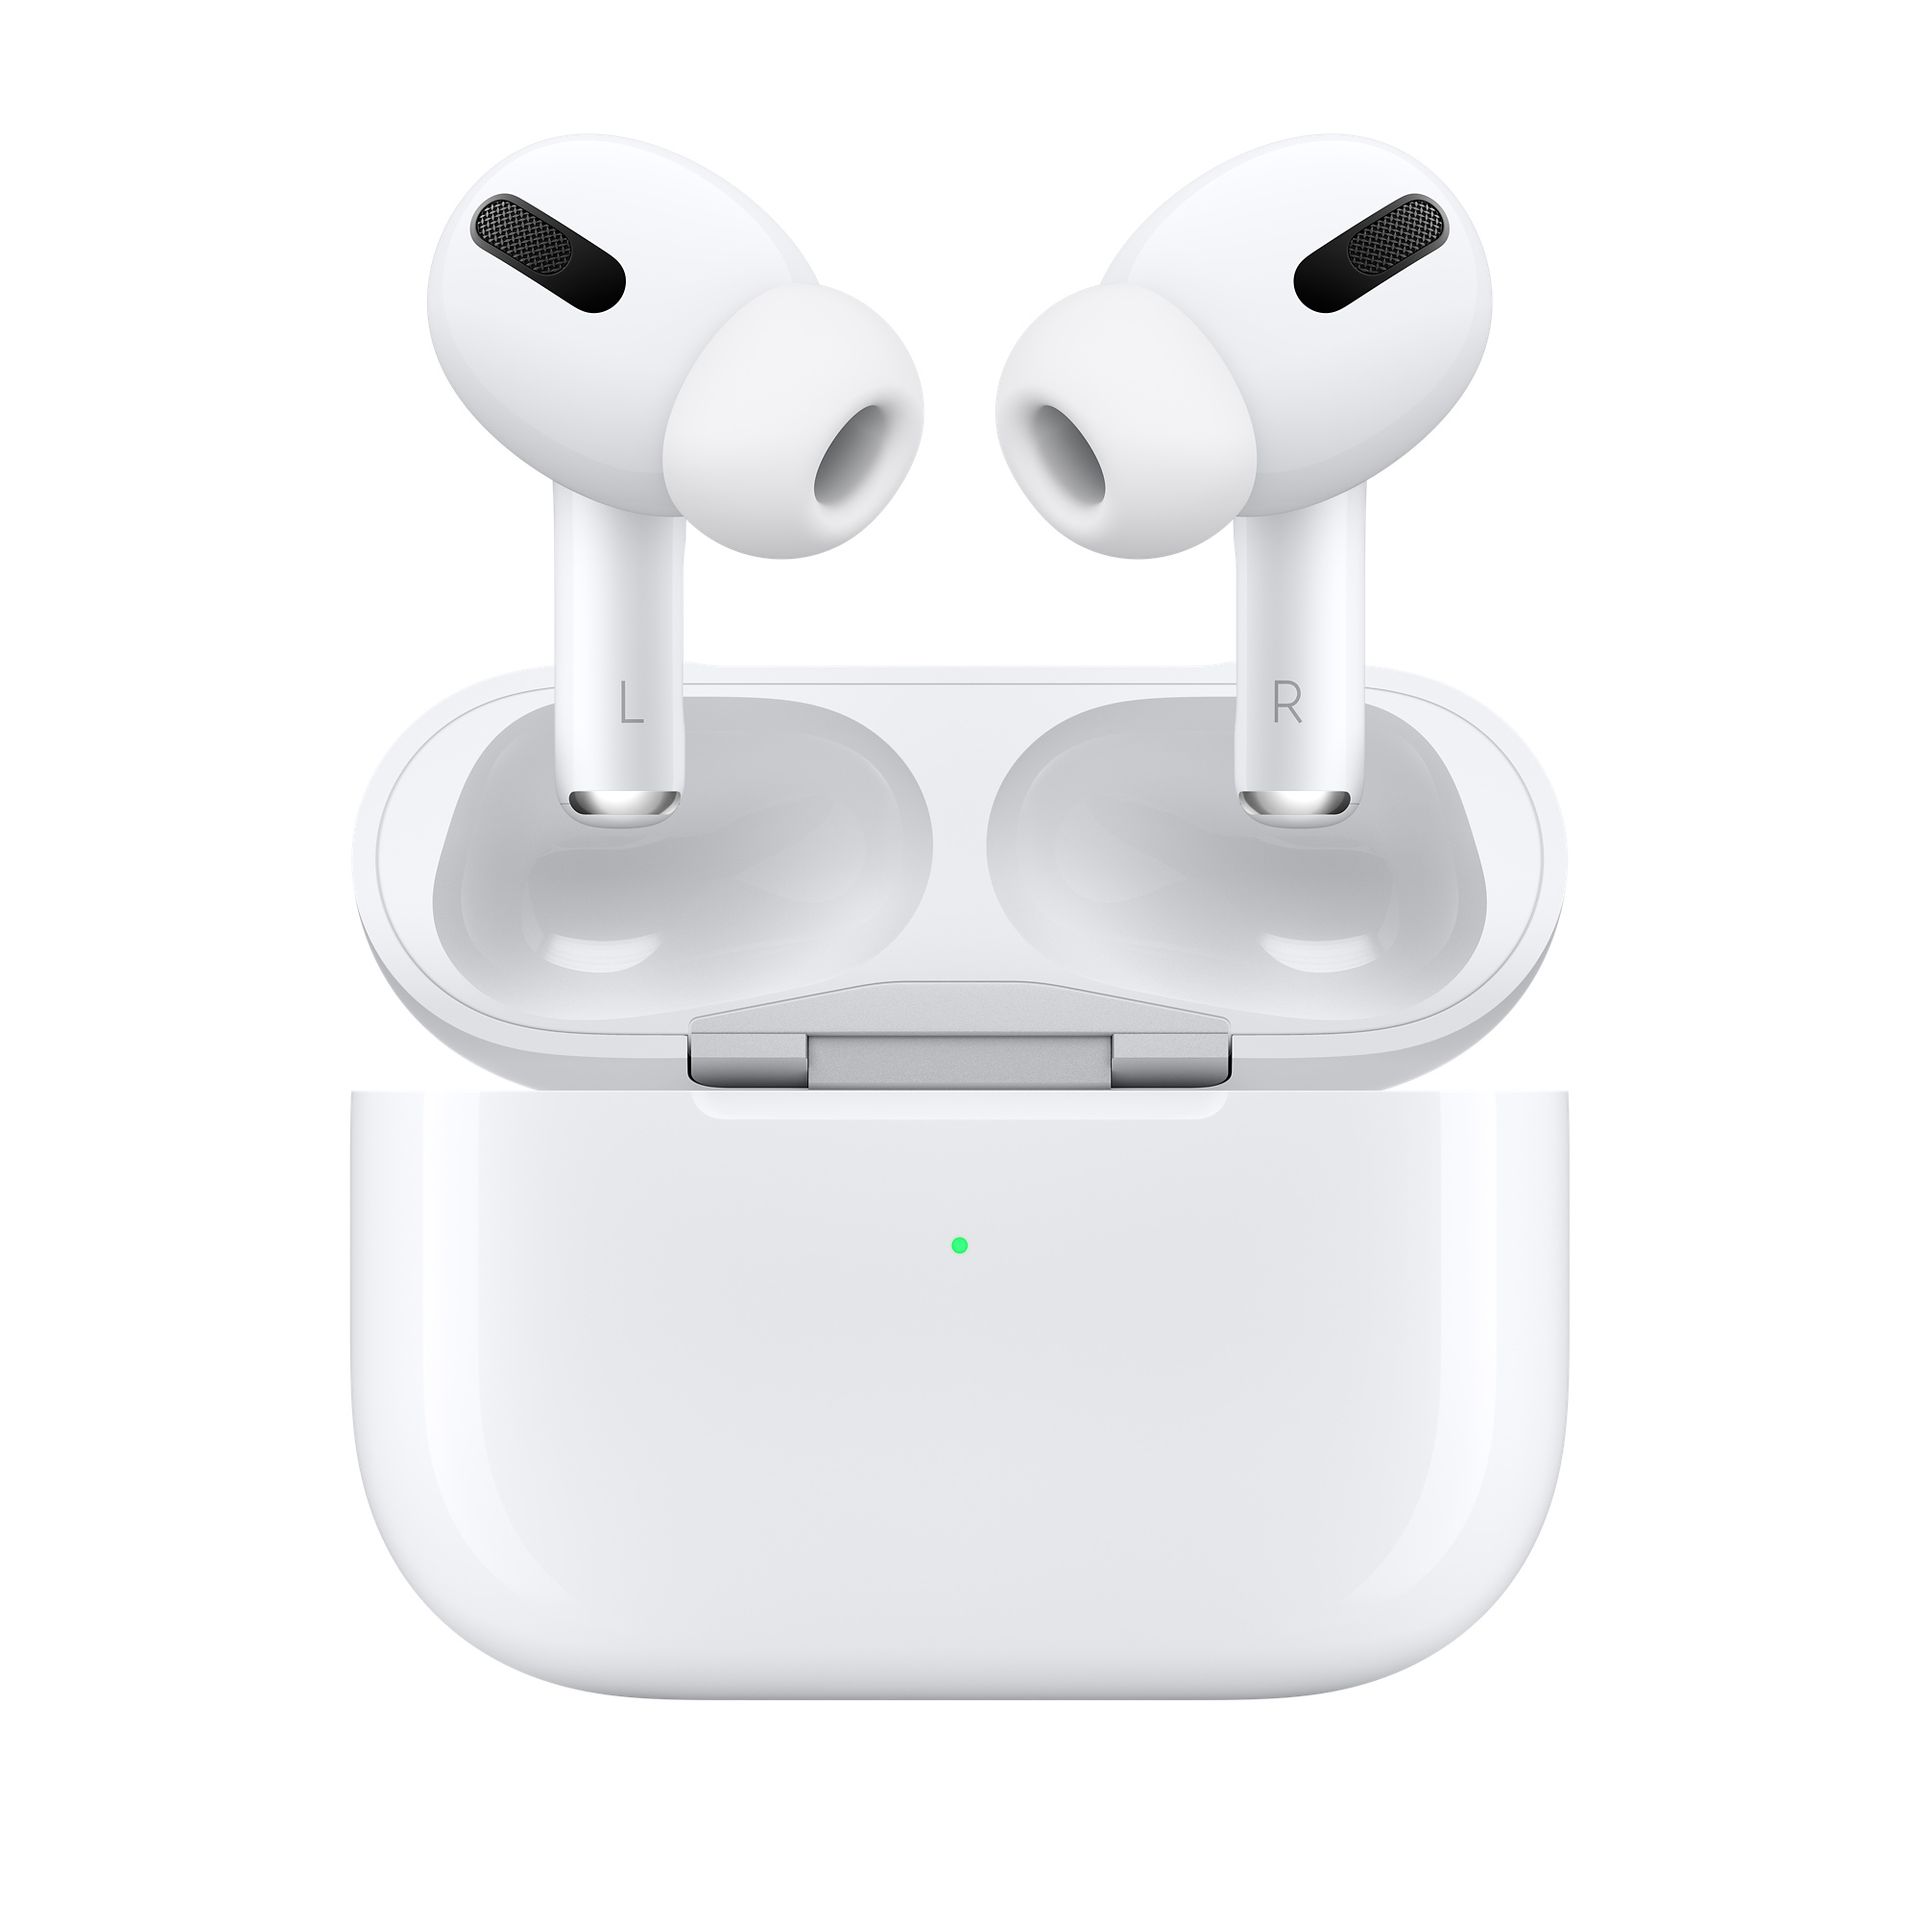 The AirPods Pro feature a new design but the pairing process is the same. Turning on AirPods pairing mode and setting up the headphones is a breeze...